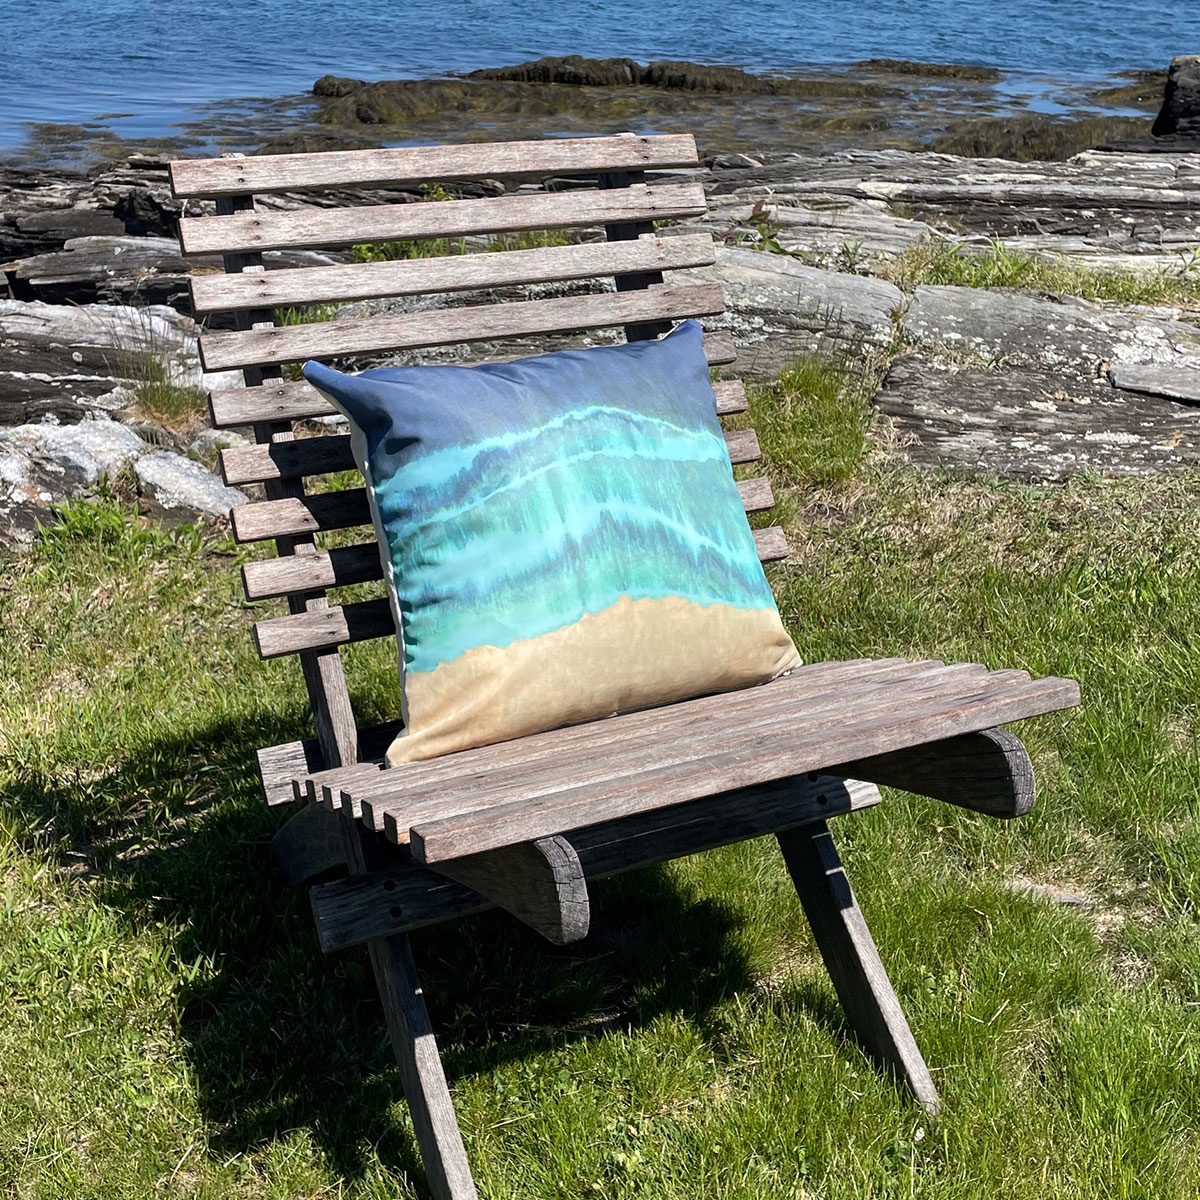 sitting on an outdoor chair is a recycled sail cloth pillow is printed with stripes of tan, teal, and blue depicting waves washing onshore